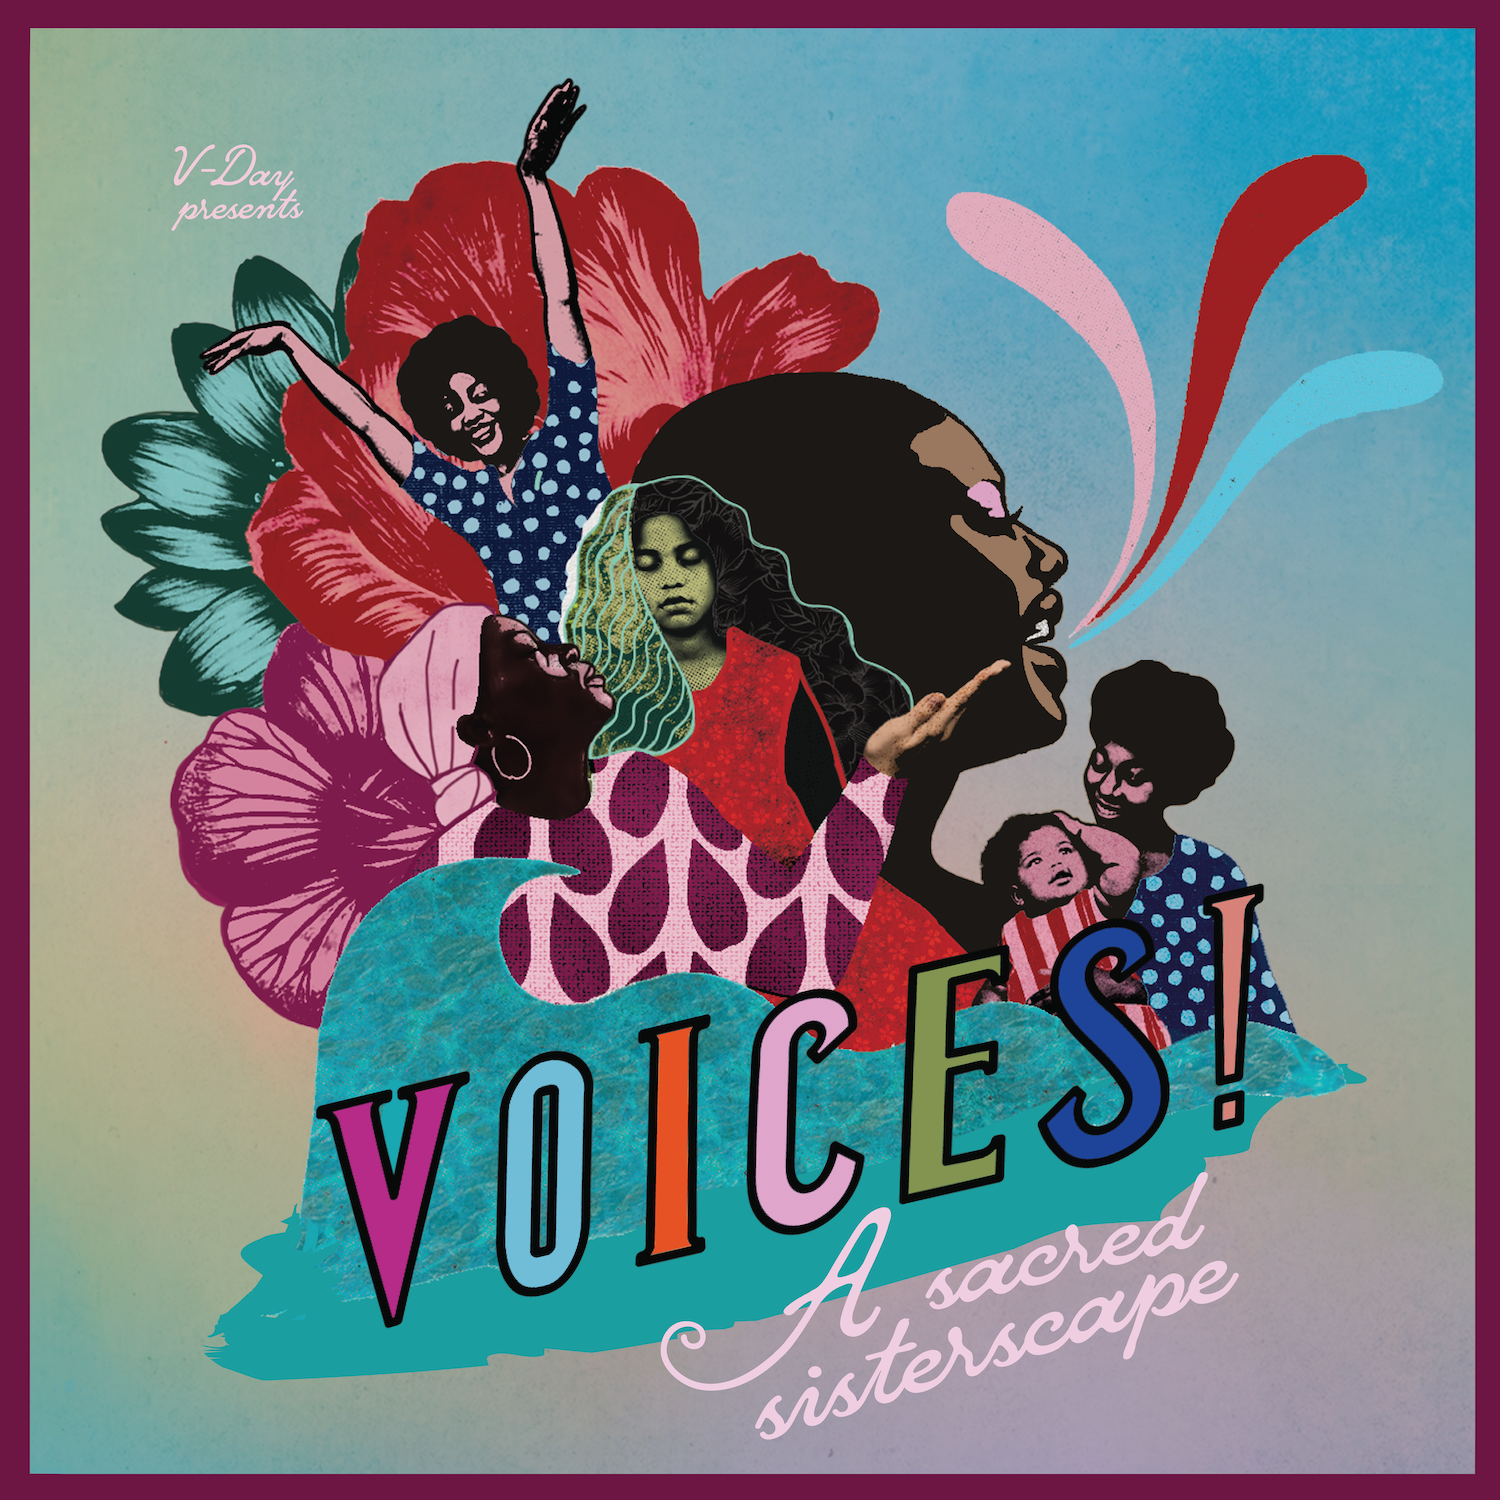 V-Day’s New Audio Play “Voices” Centers Black Femme Stories